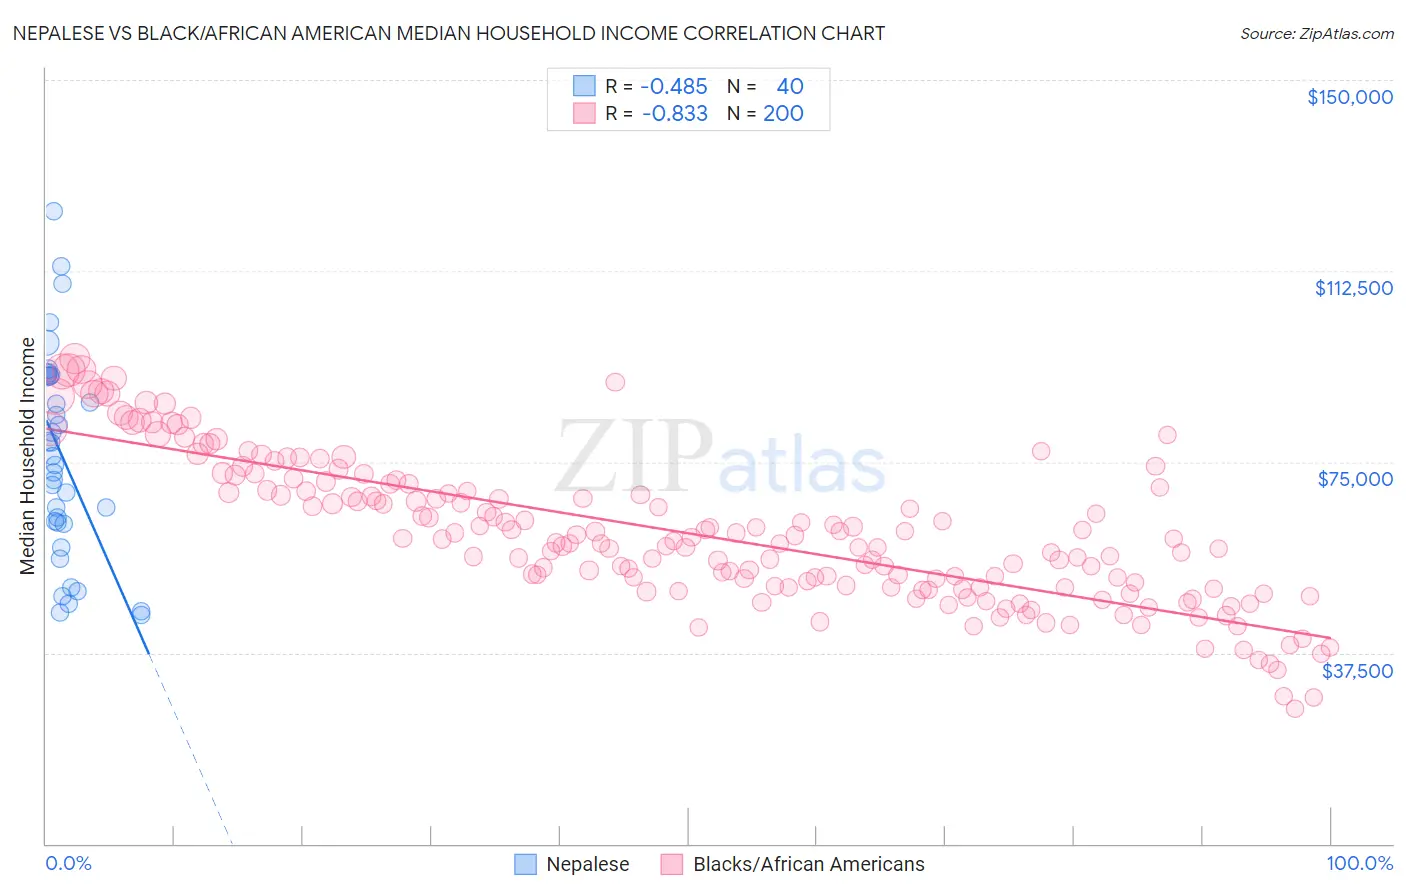 Nepalese vs Black/African American Median Household Income